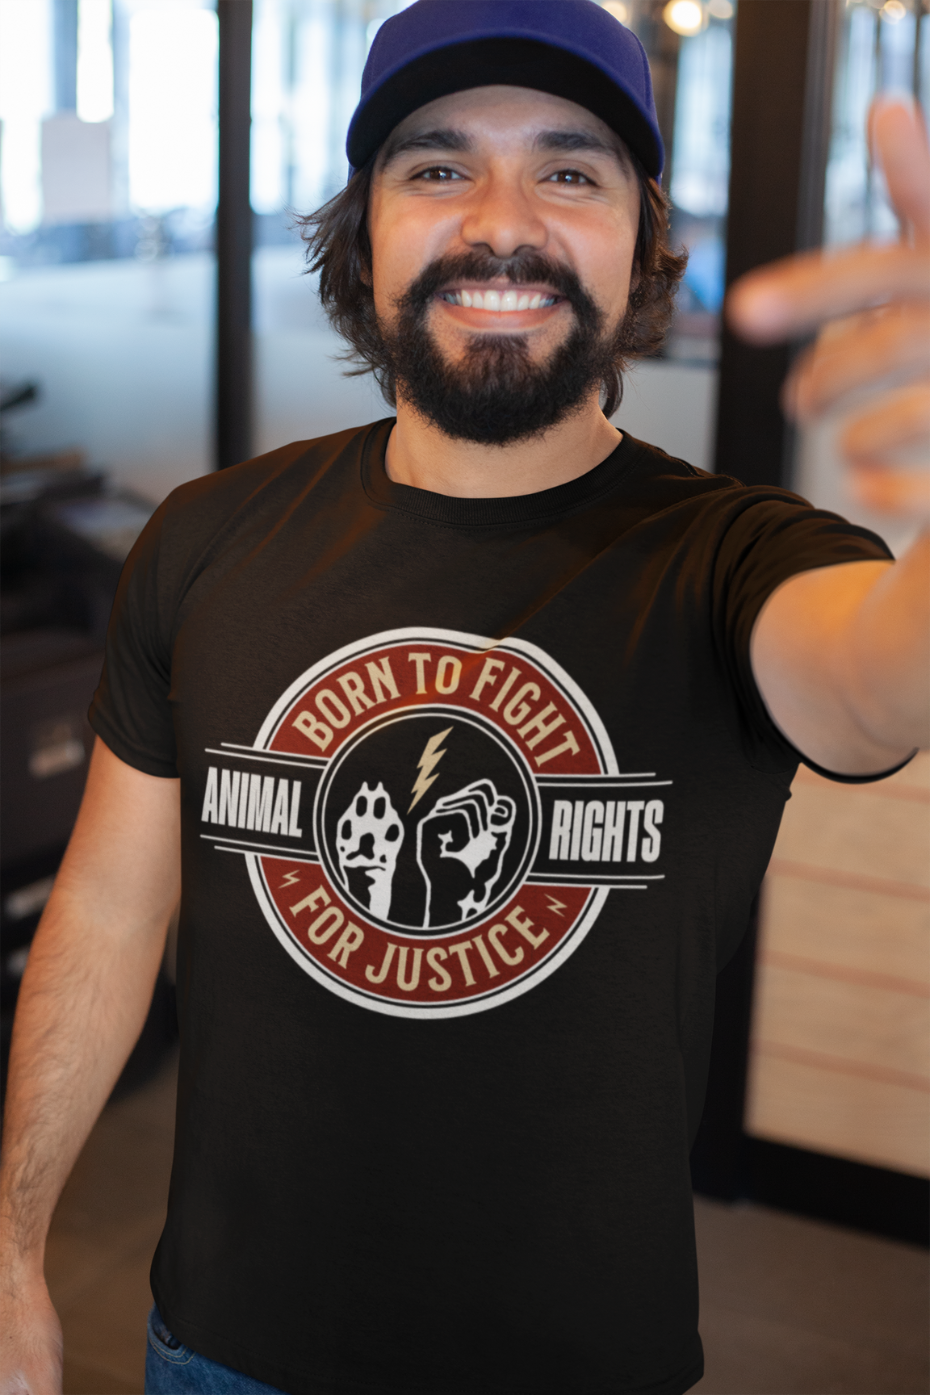 Born to Fight For Justice Unisex Basic Softstyle T-Shirt